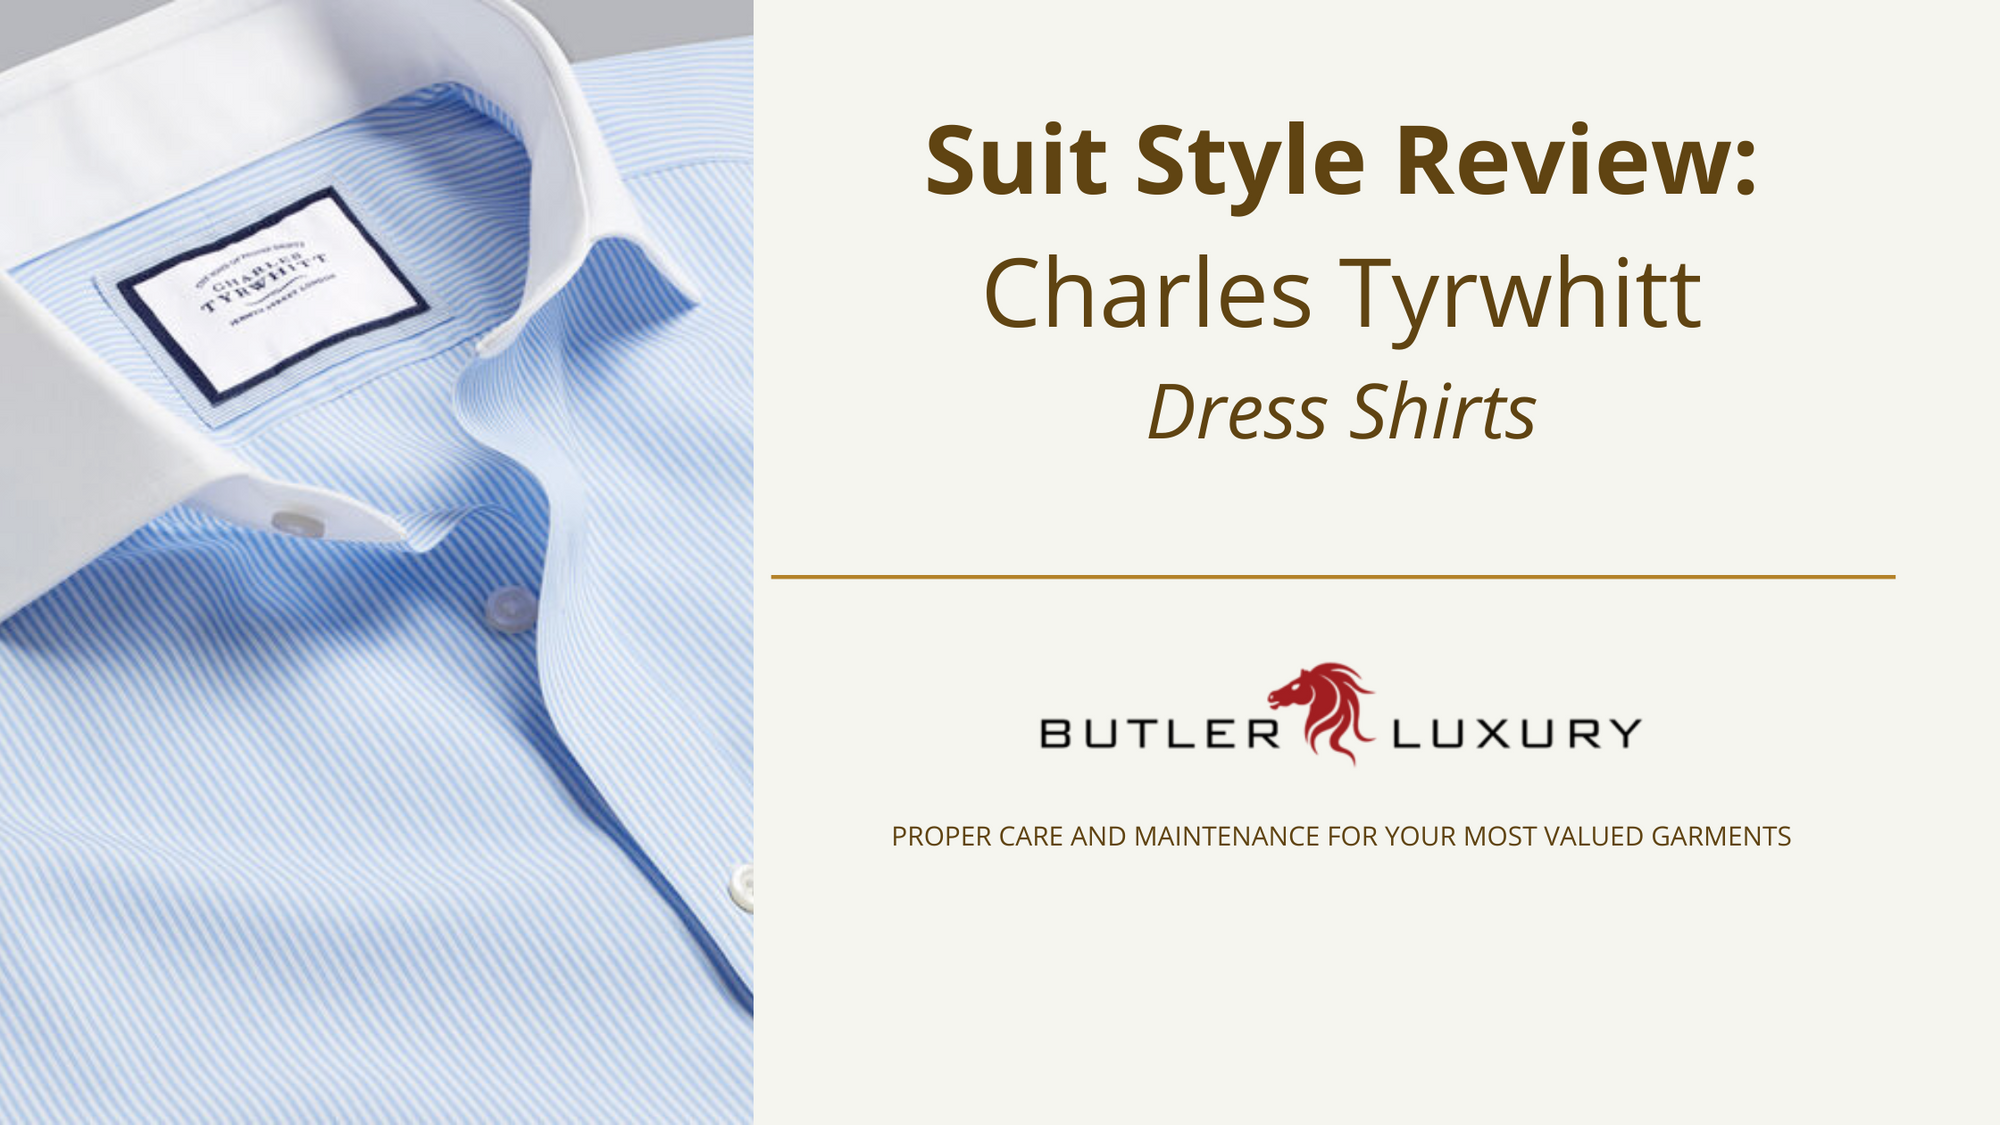 Suit Style Review: Charles Tyrwhitt Dress Shirts